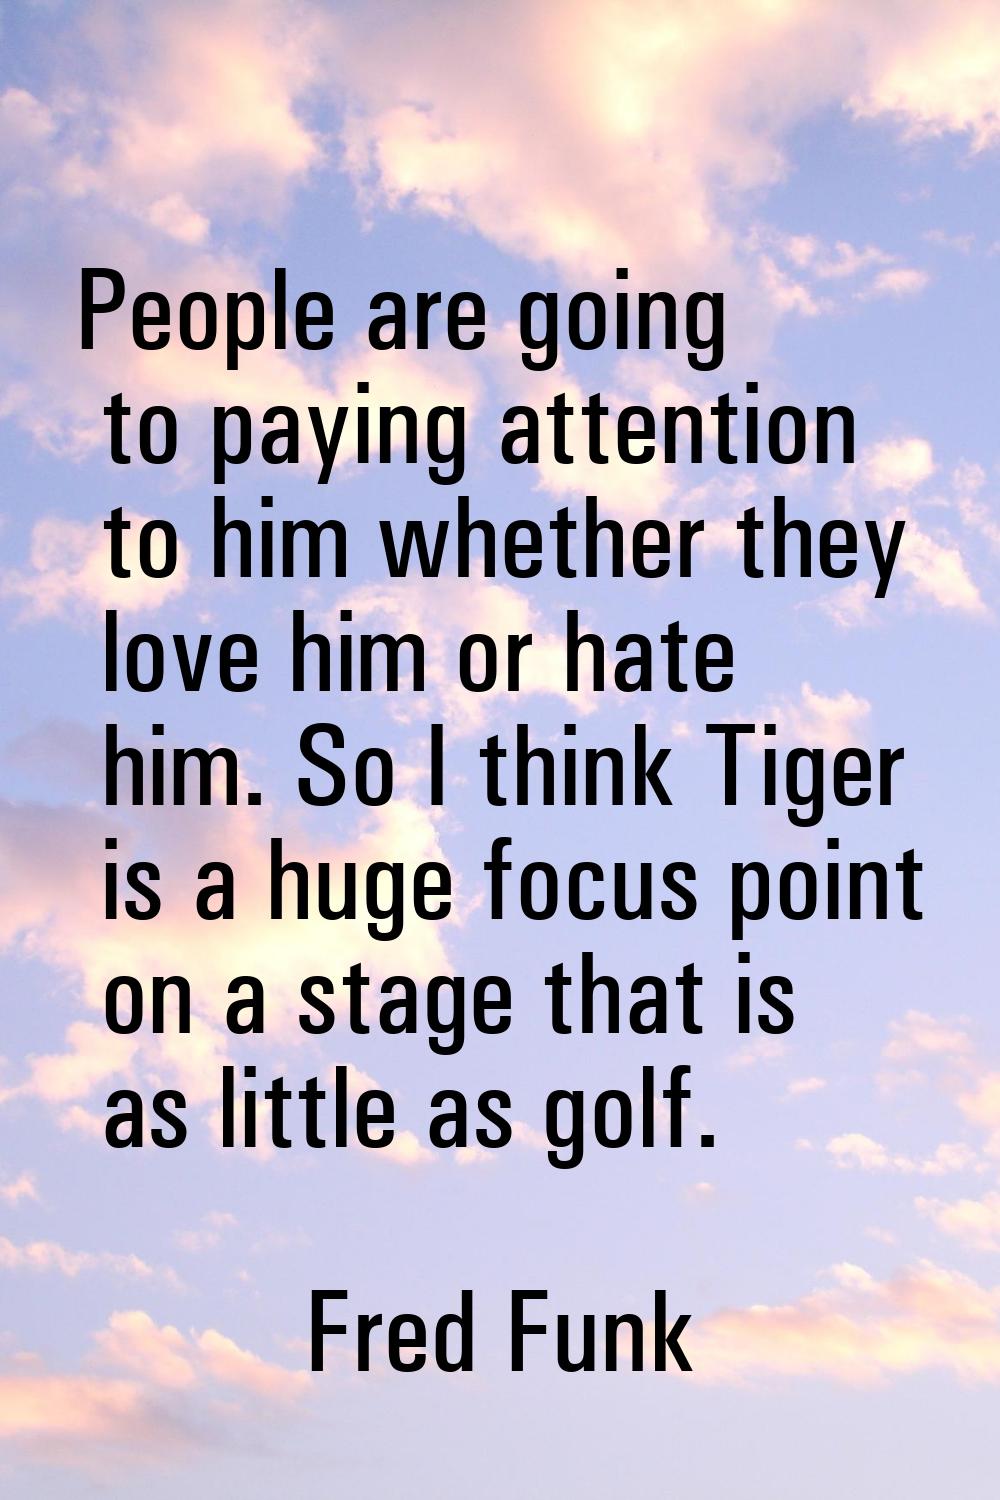 People are going to paying attention to him whether they love him or hate him. So I think Tiger is 